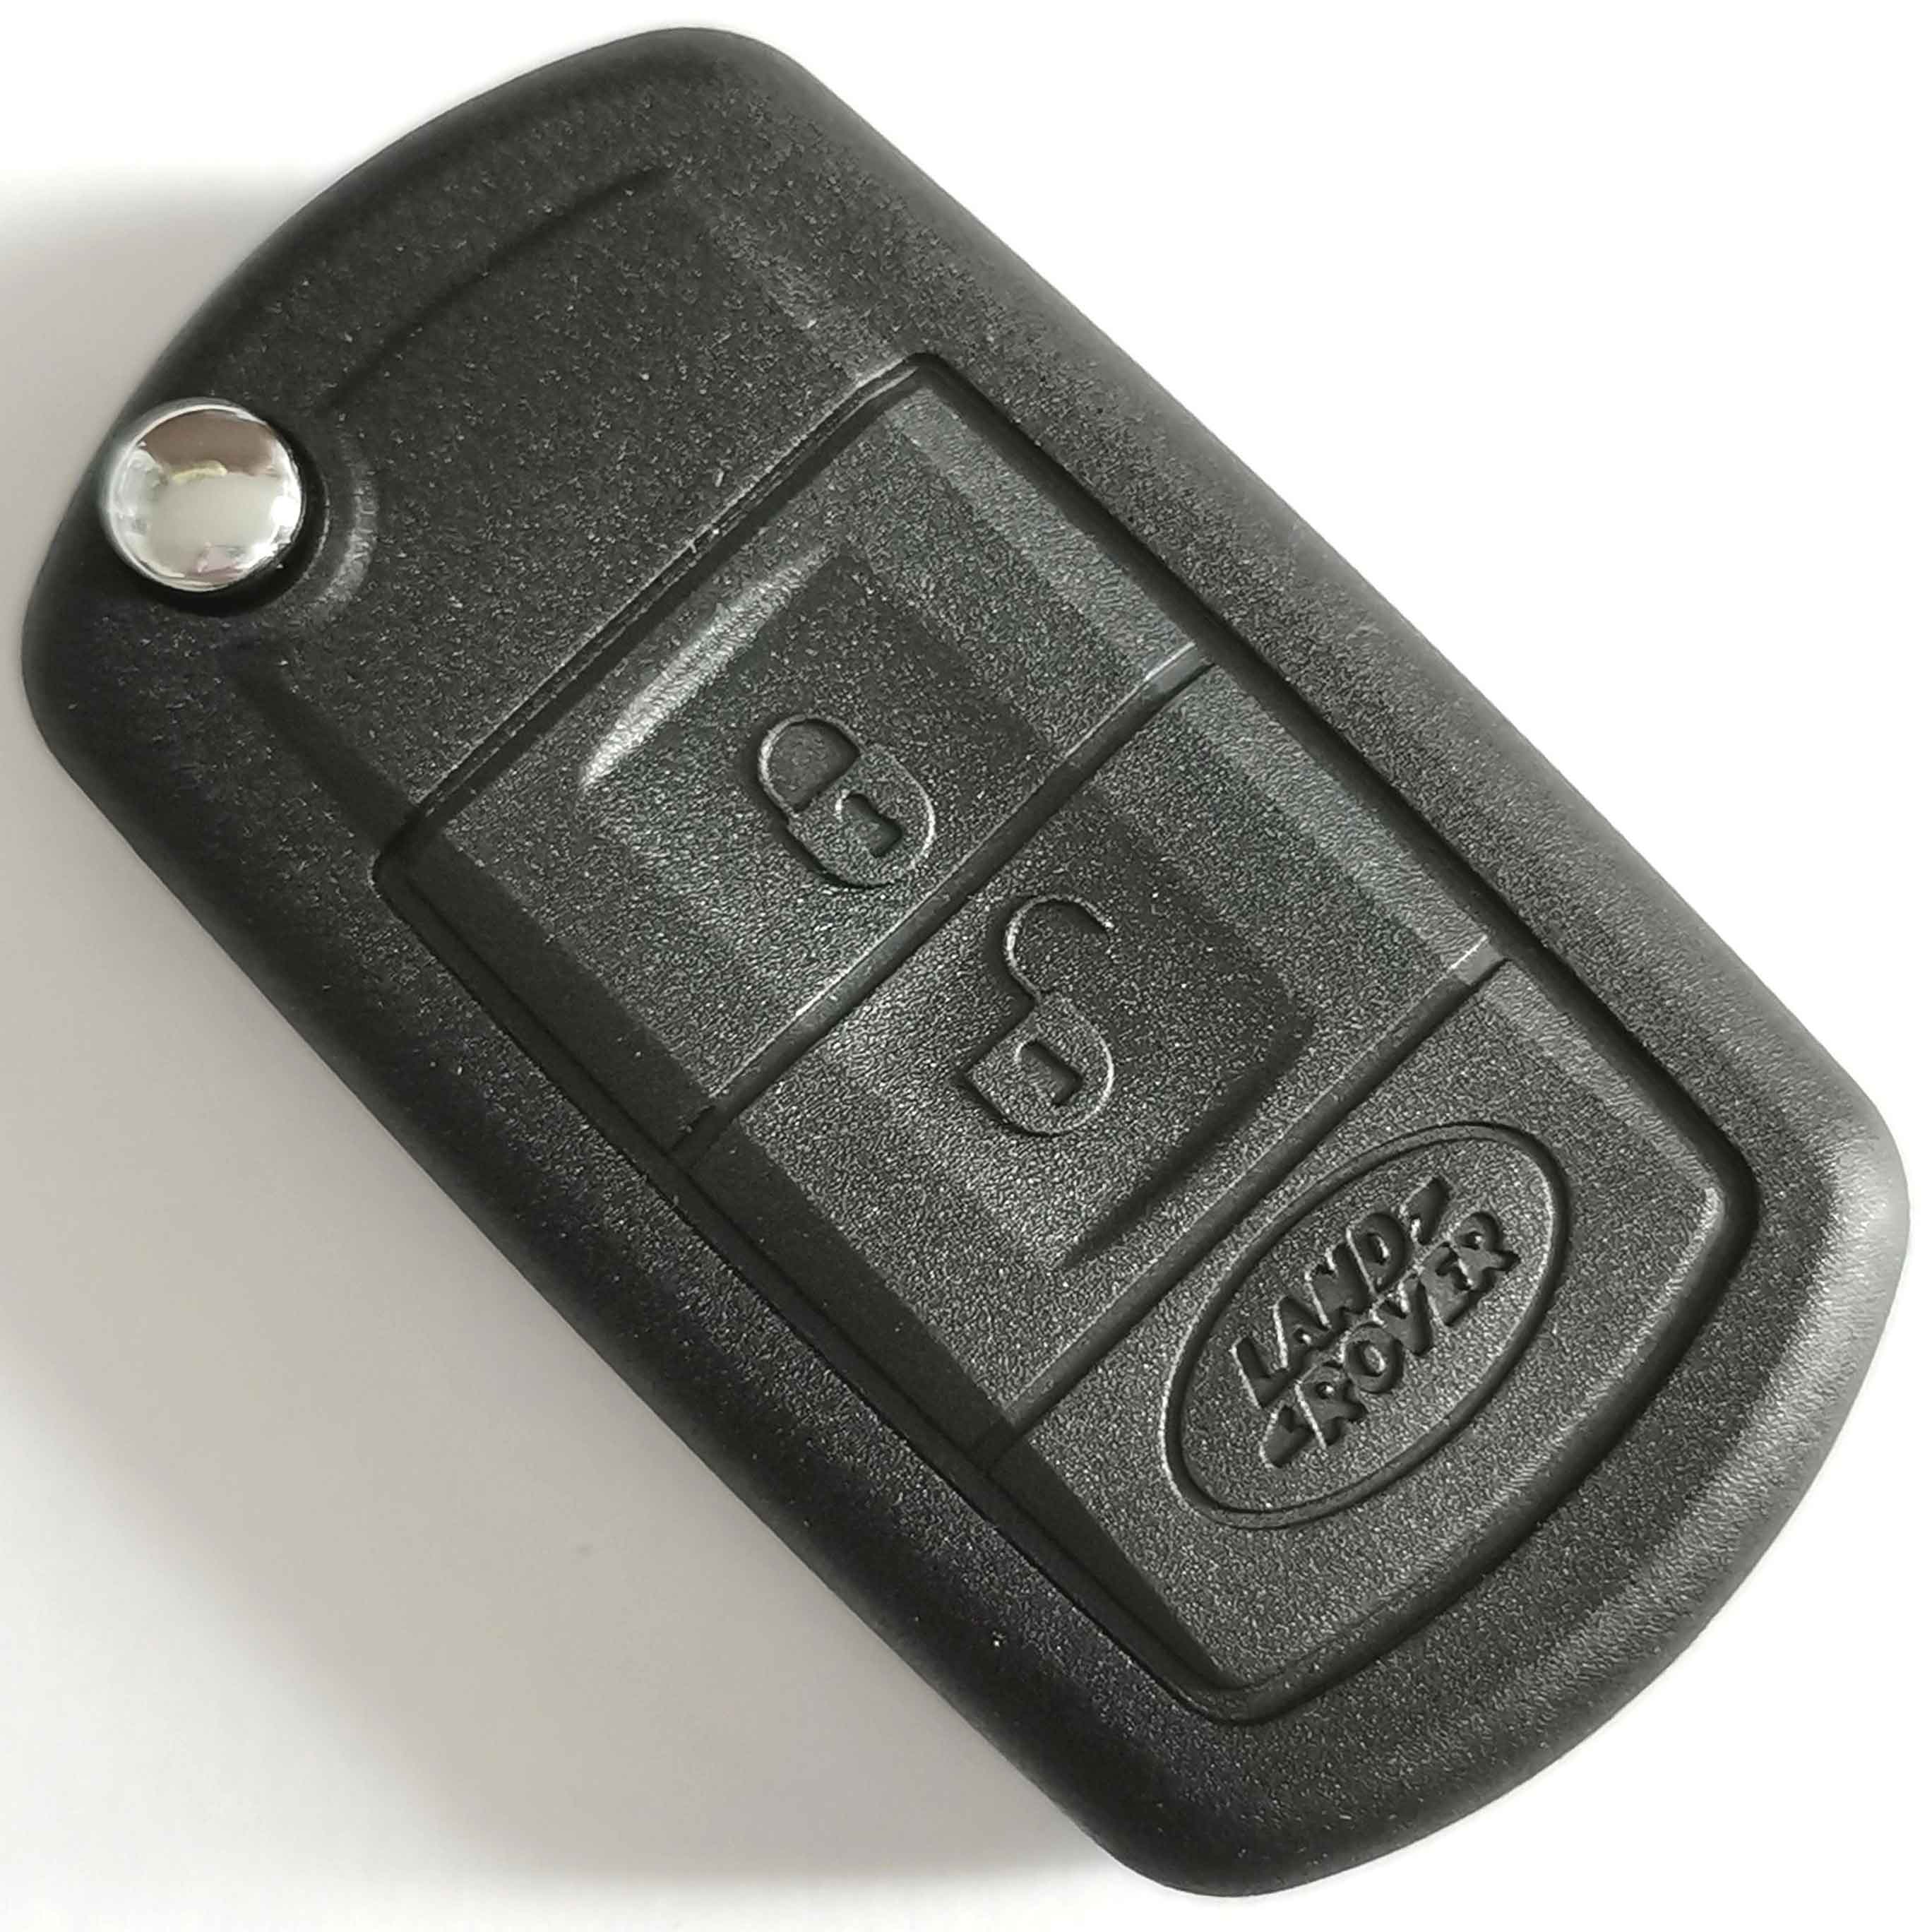  3 Buttons 315 MHz Flip Remote Key for Land Rover Sport Discovery 3 Vogue System - WJZ PCB